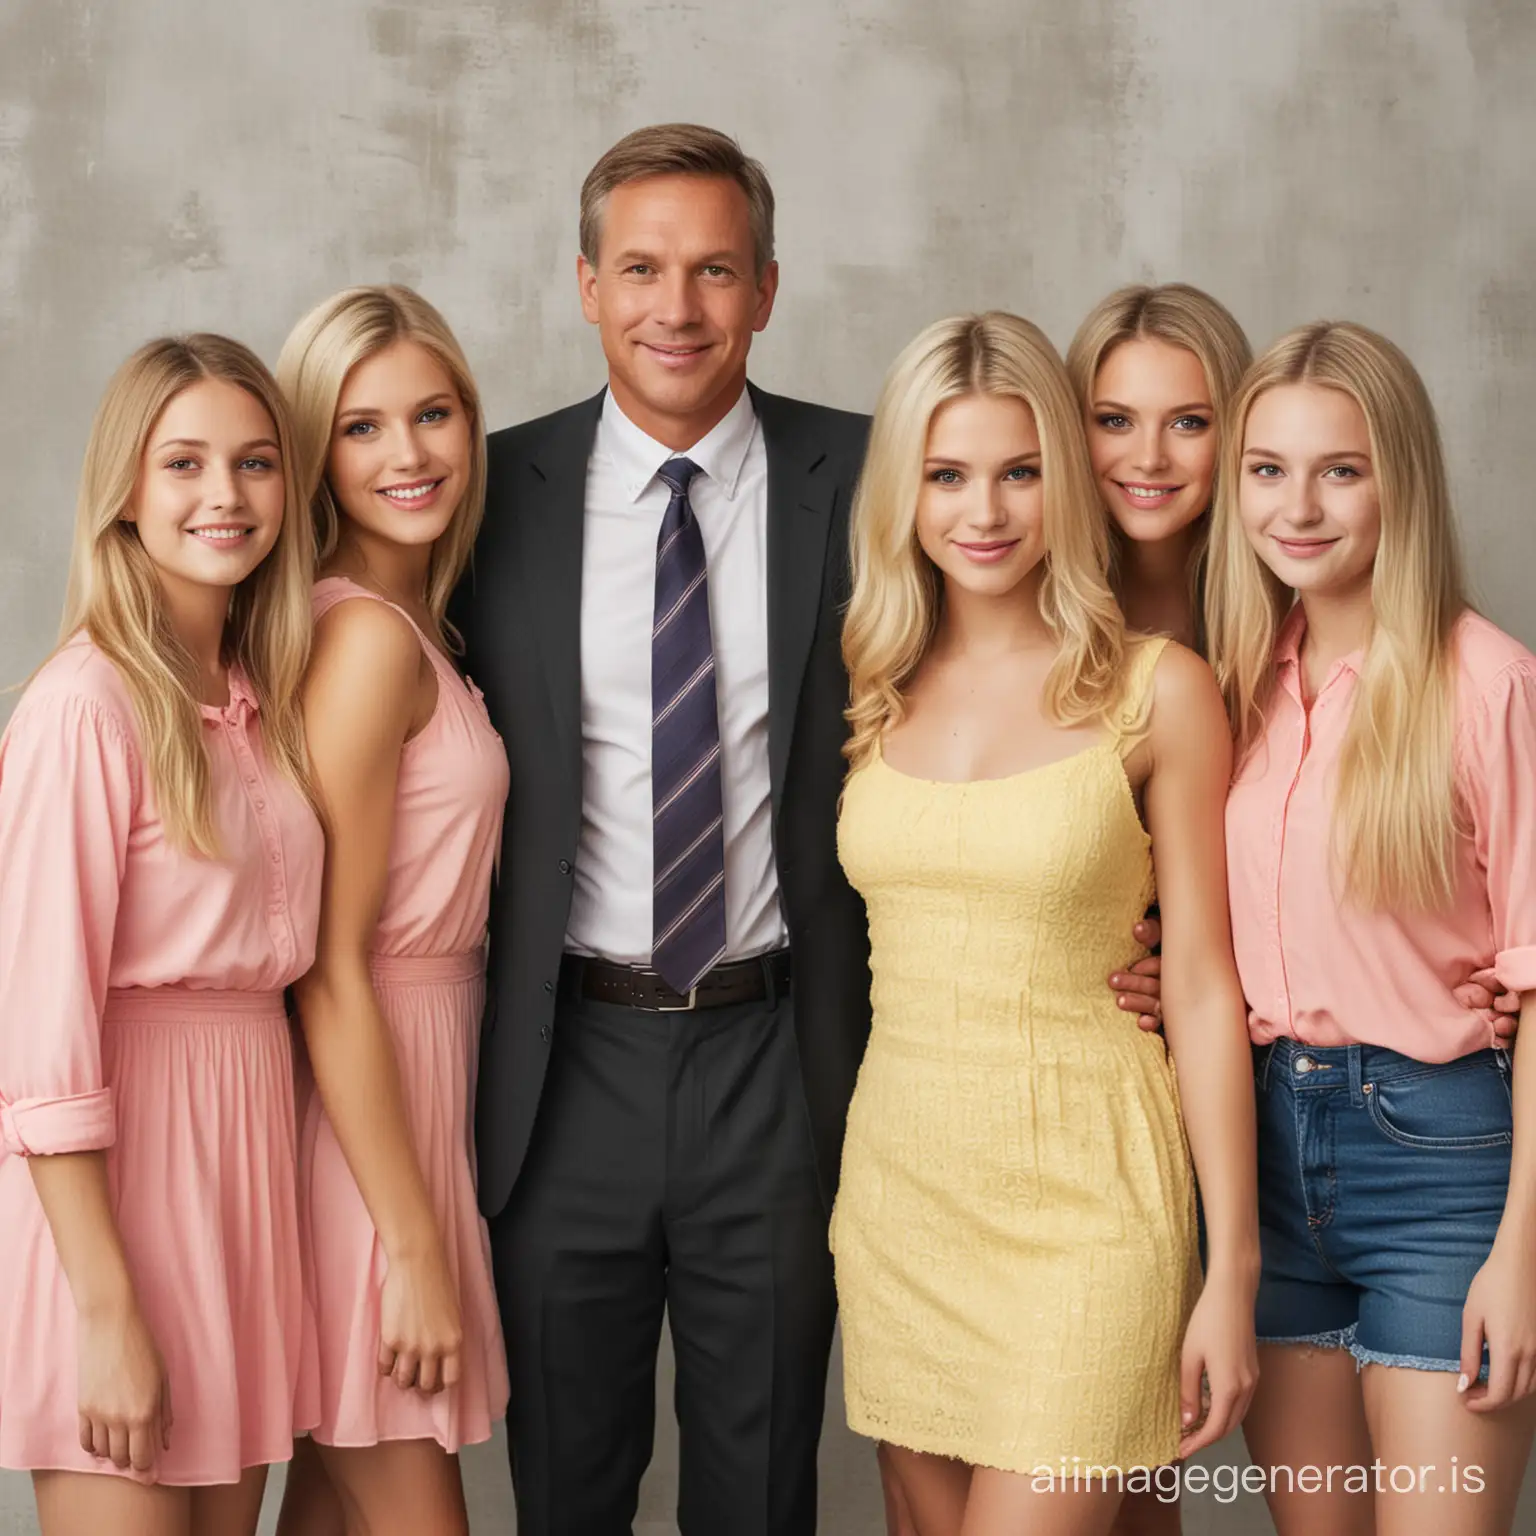 Guiding-Mentor-and-His-Family-of-Seven-A-Father-Teaches-with-His-Wife-and-Five-Blonde-Teenage-Daughters